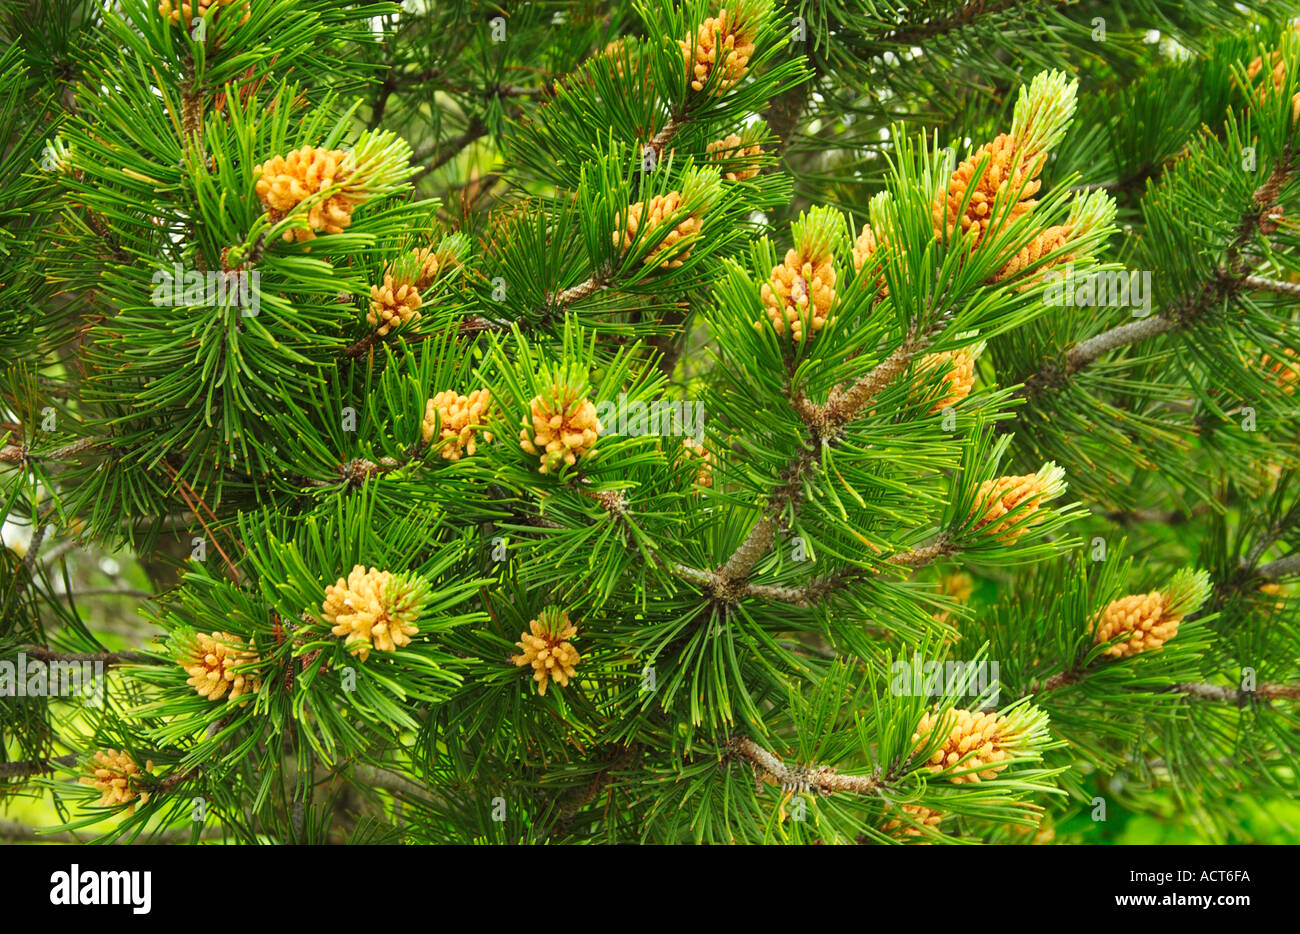 Immature pine cones on trees in development stage Stock Photo